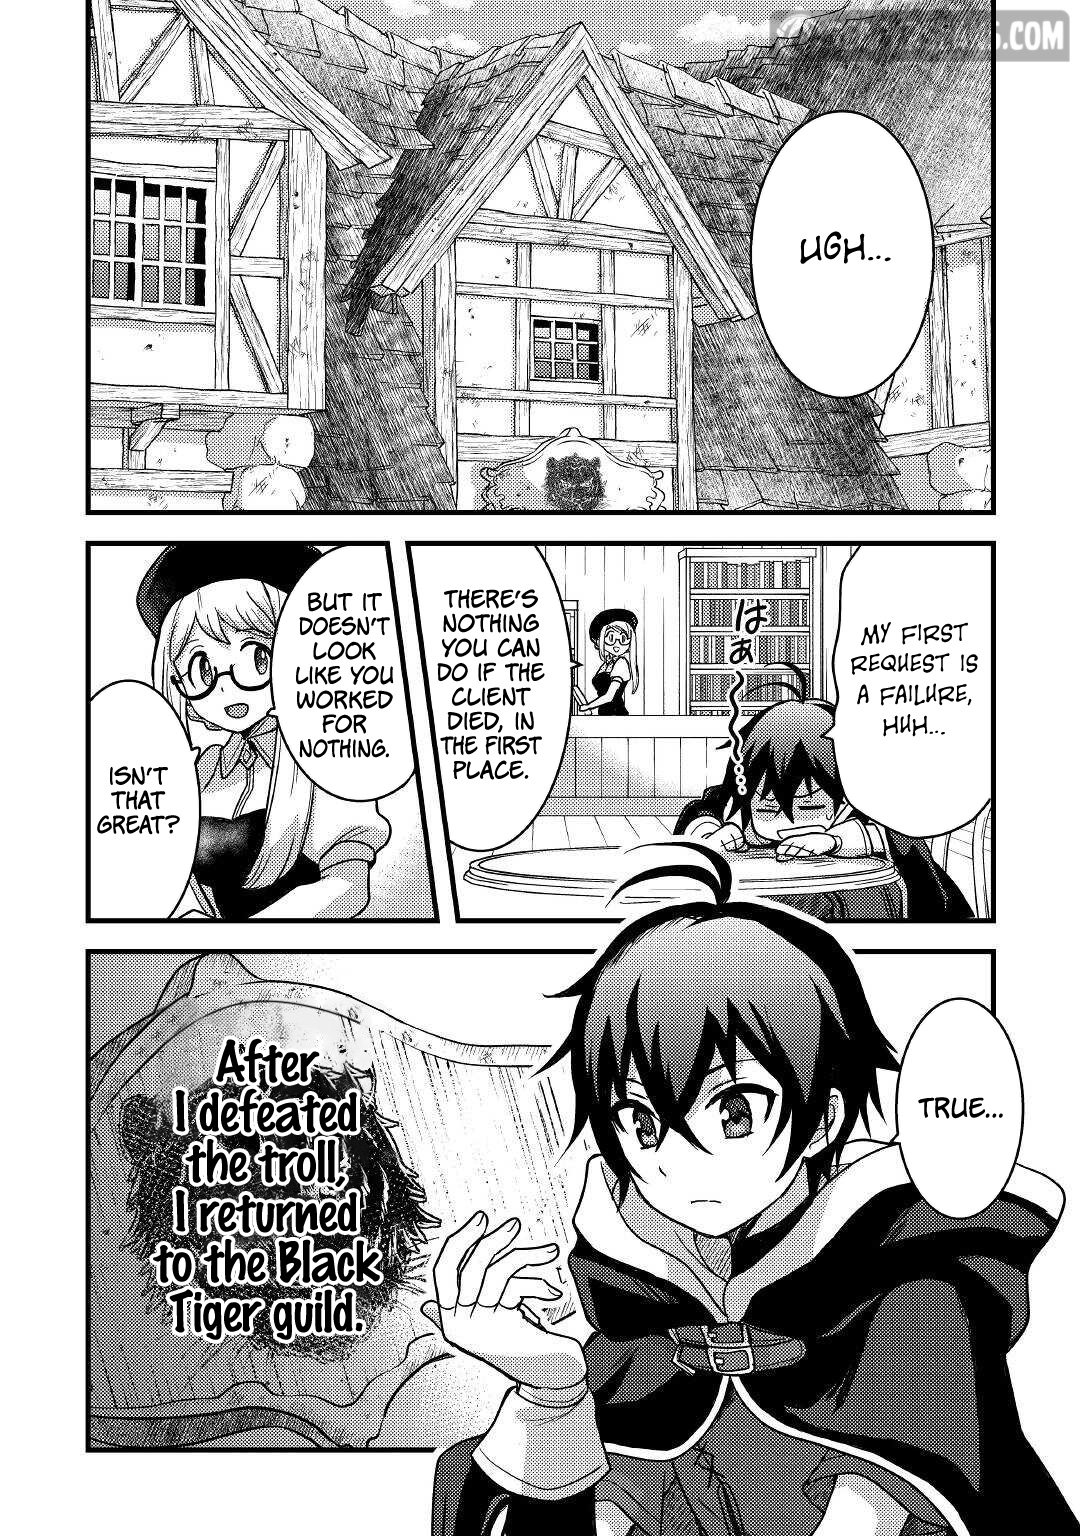 Read People Made Fun of Me for Being Jobless but Its Not Bad at All Manga  English [New Chapters] Online Free - MangaClash